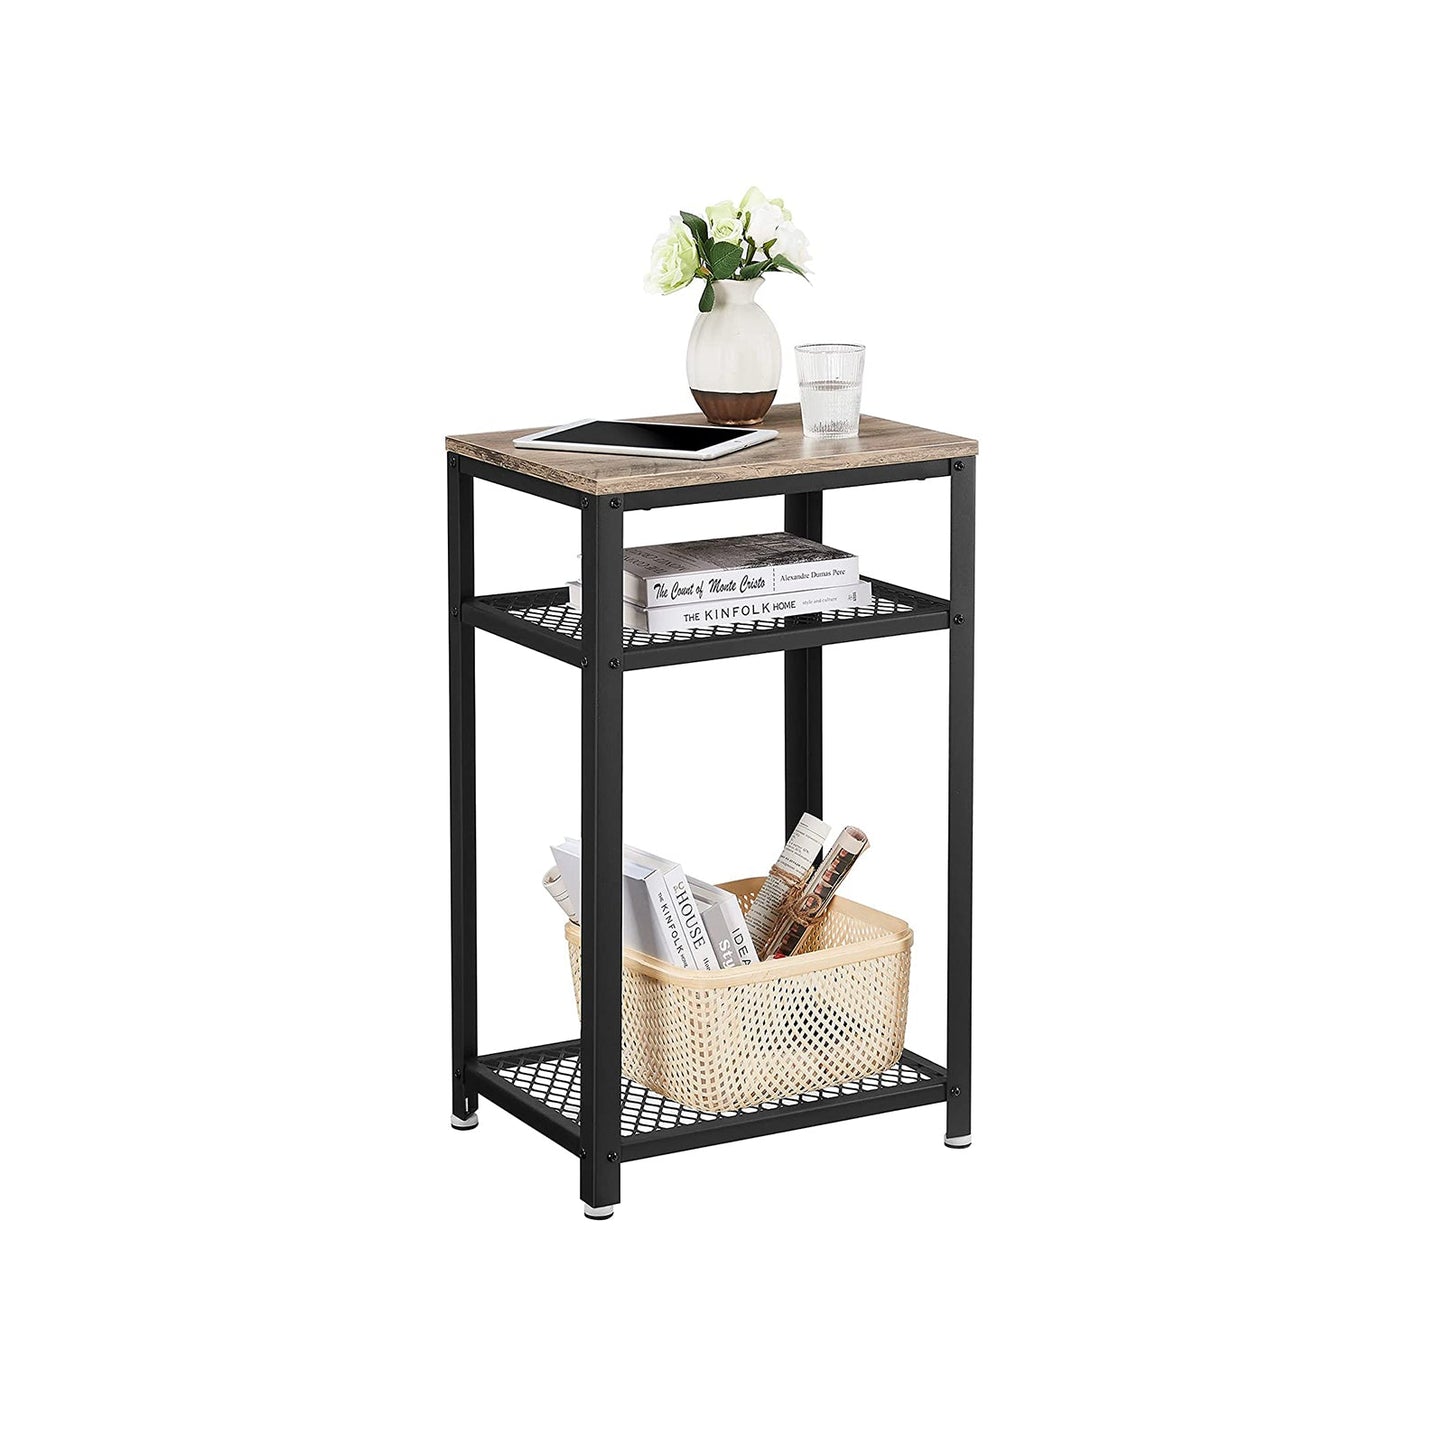 End Telephone Table with 2 Mesh Shelves